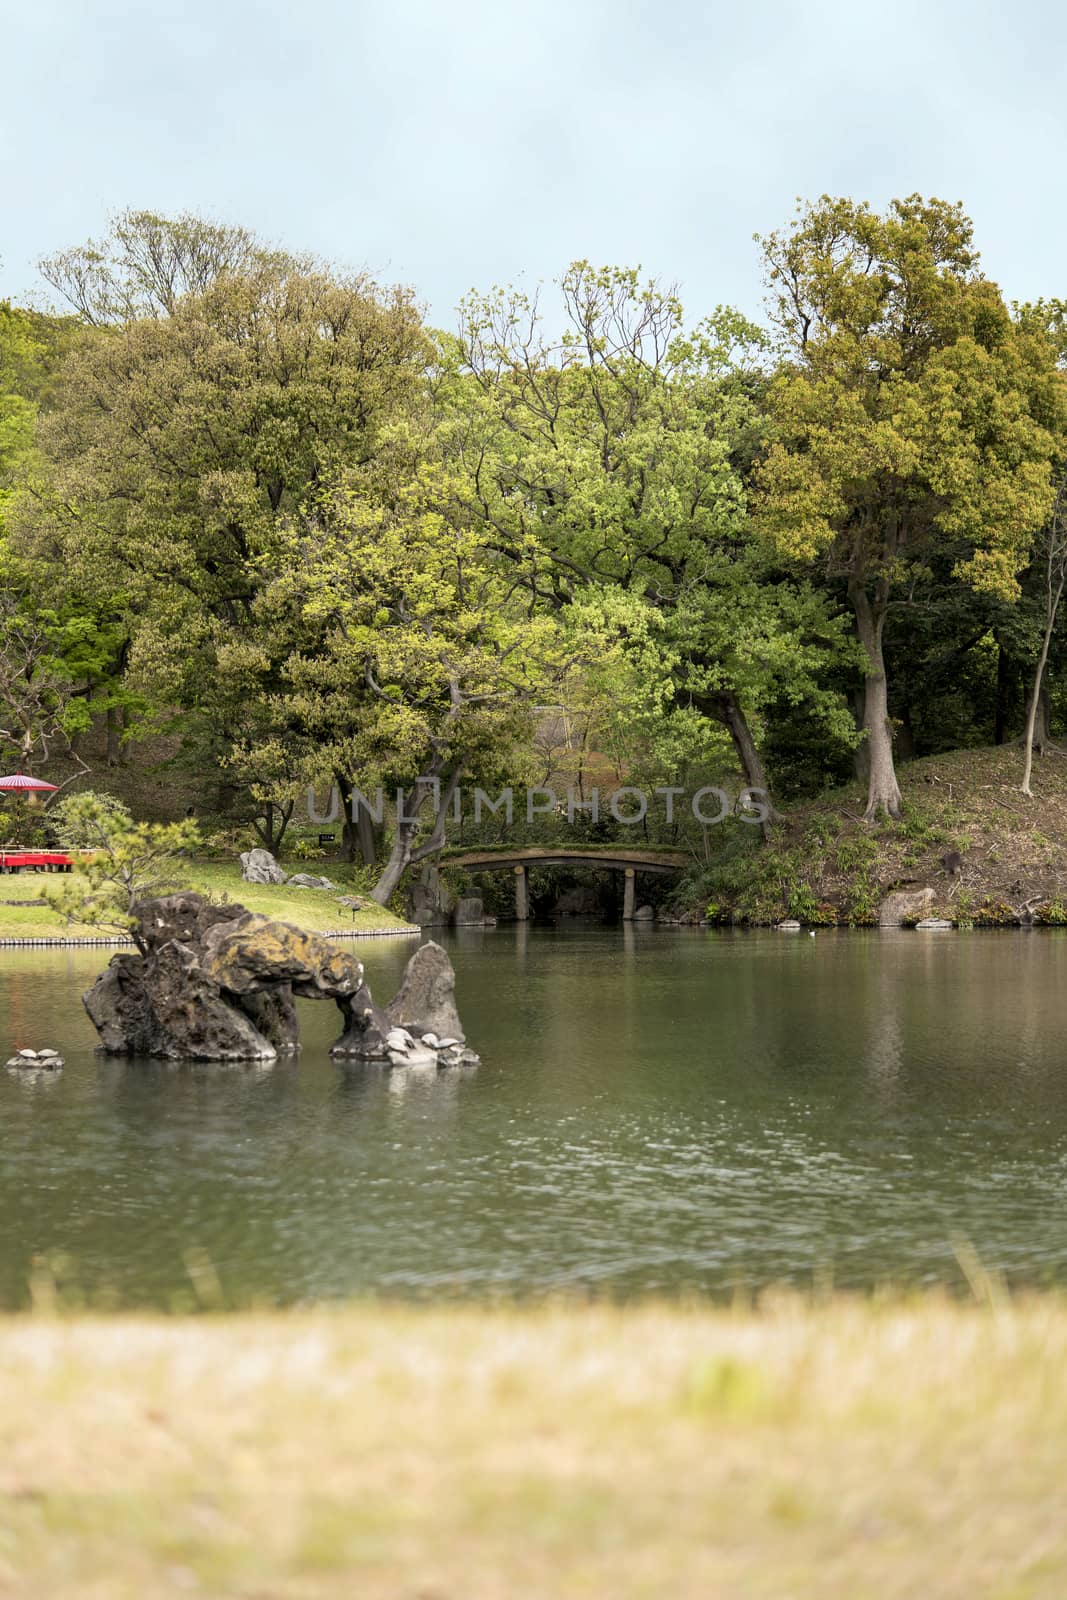 Turtles on the stone islet Houraijima and the wooden japanese bridge Togetsukyo on the pond of Rikugien Park in Bunkyo district, north of Tokyo. The park was created at the beginning of the 18th century.